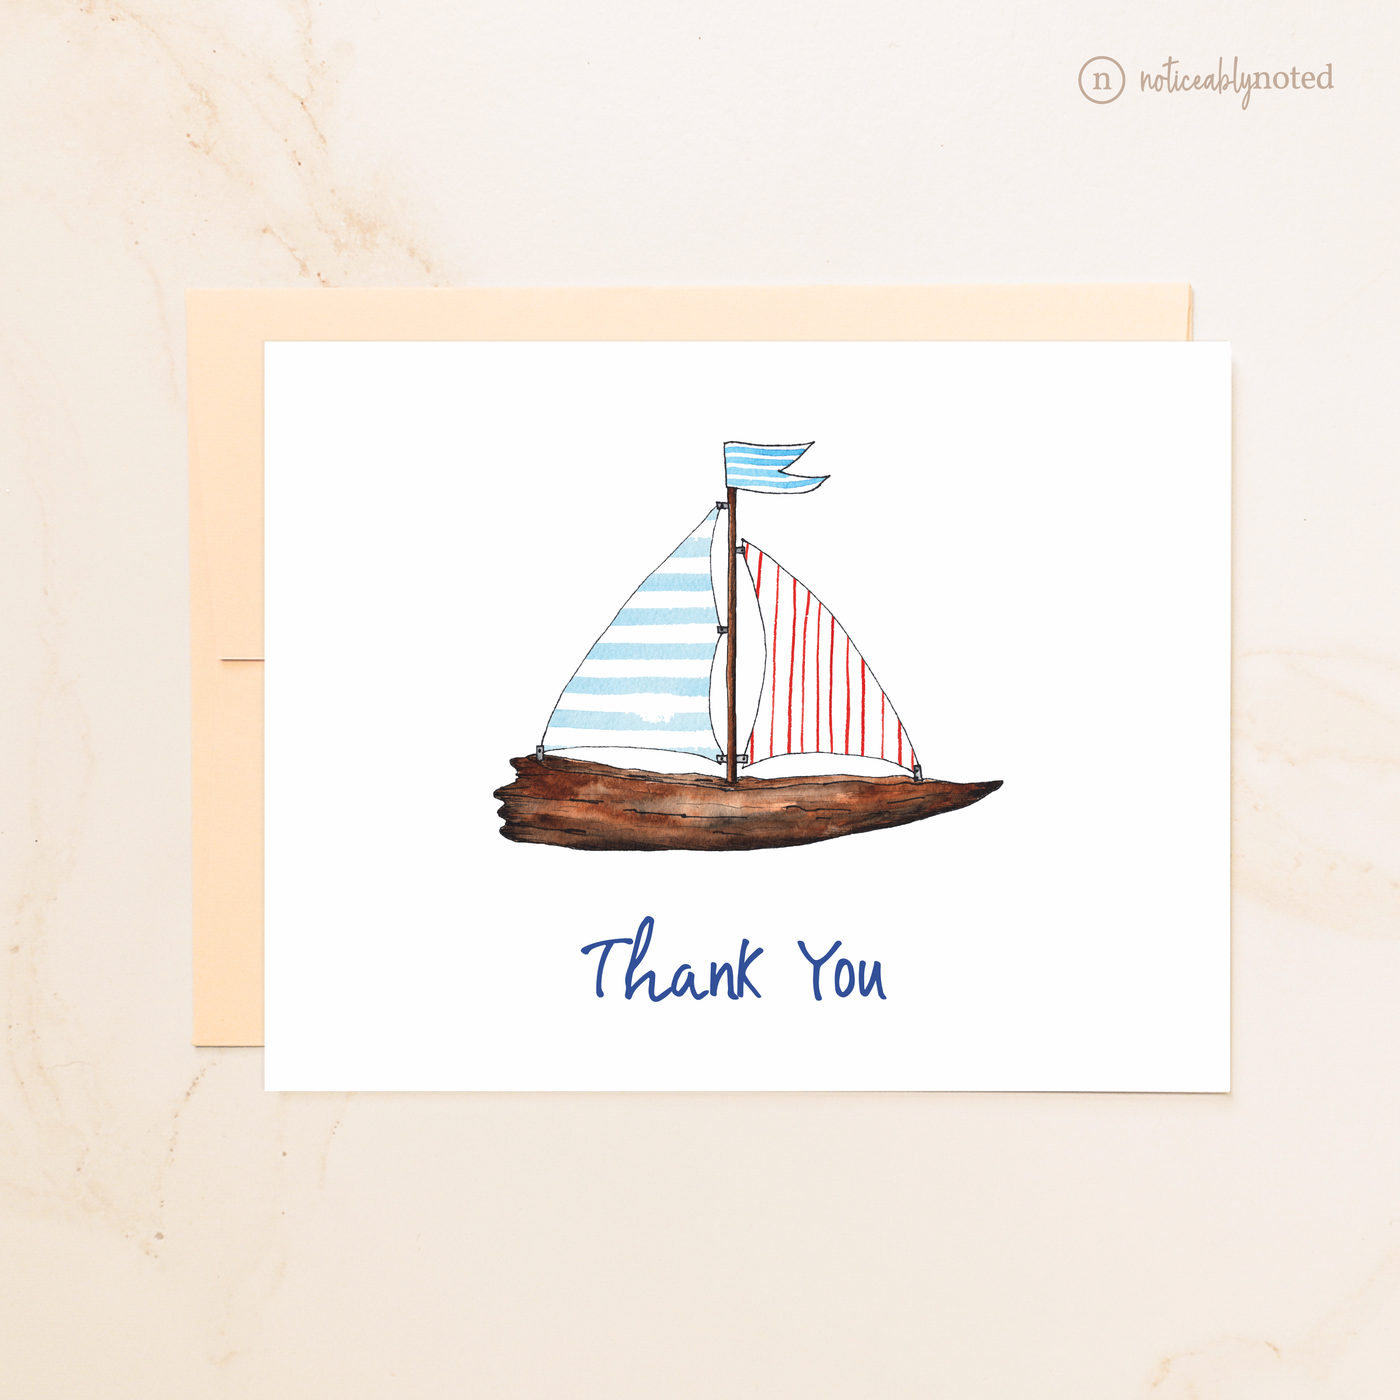 Sailboat Thank You Folded Cards | Noticeably Noted